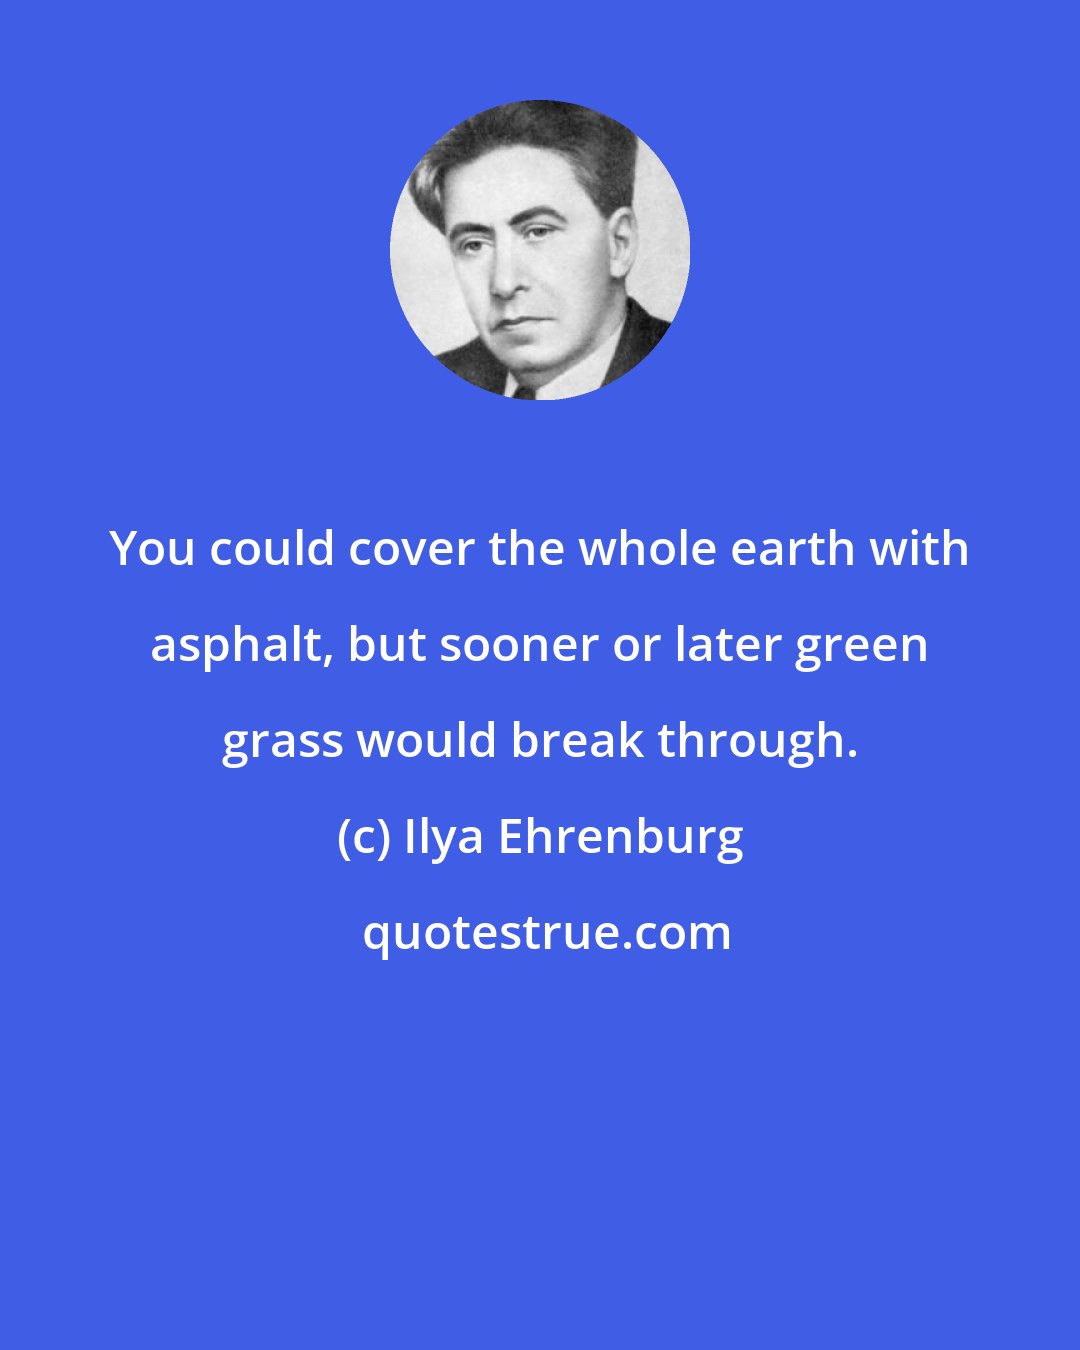 Ilya Ehrenburg: You could cover the whole earth with asphalt, but sooner or later green grass would break through.